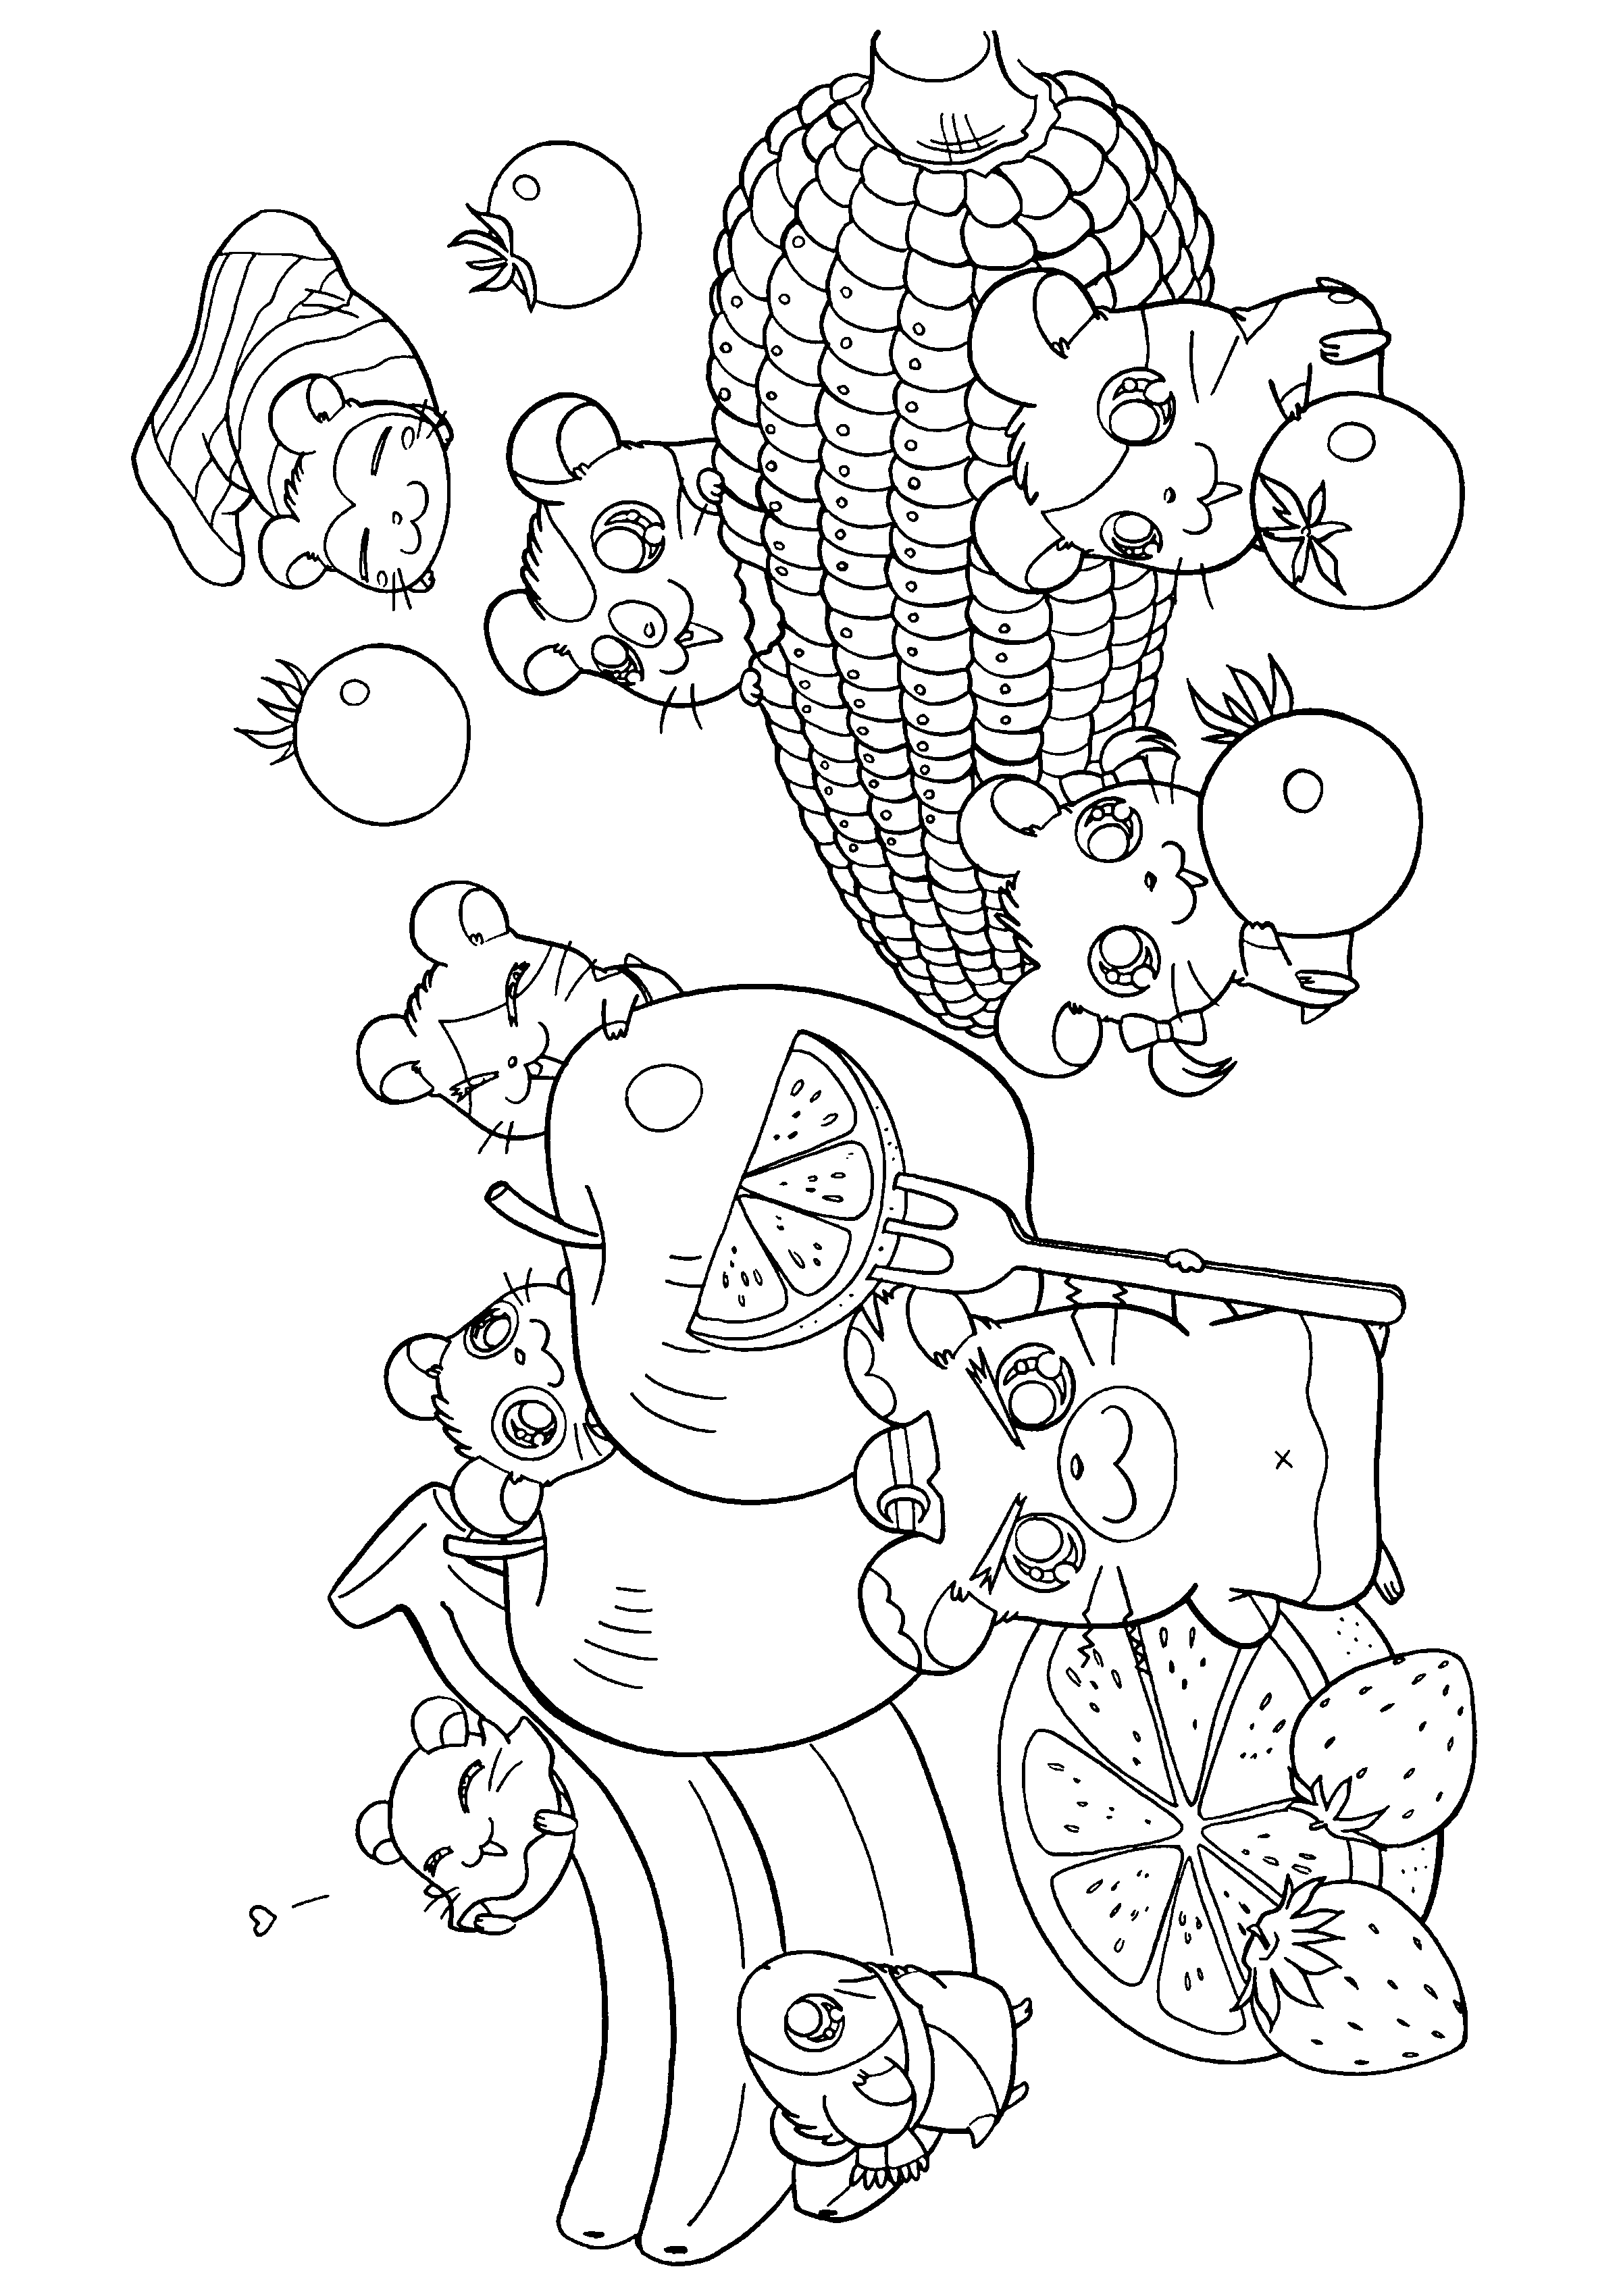 Hamtaro Coloring Pages